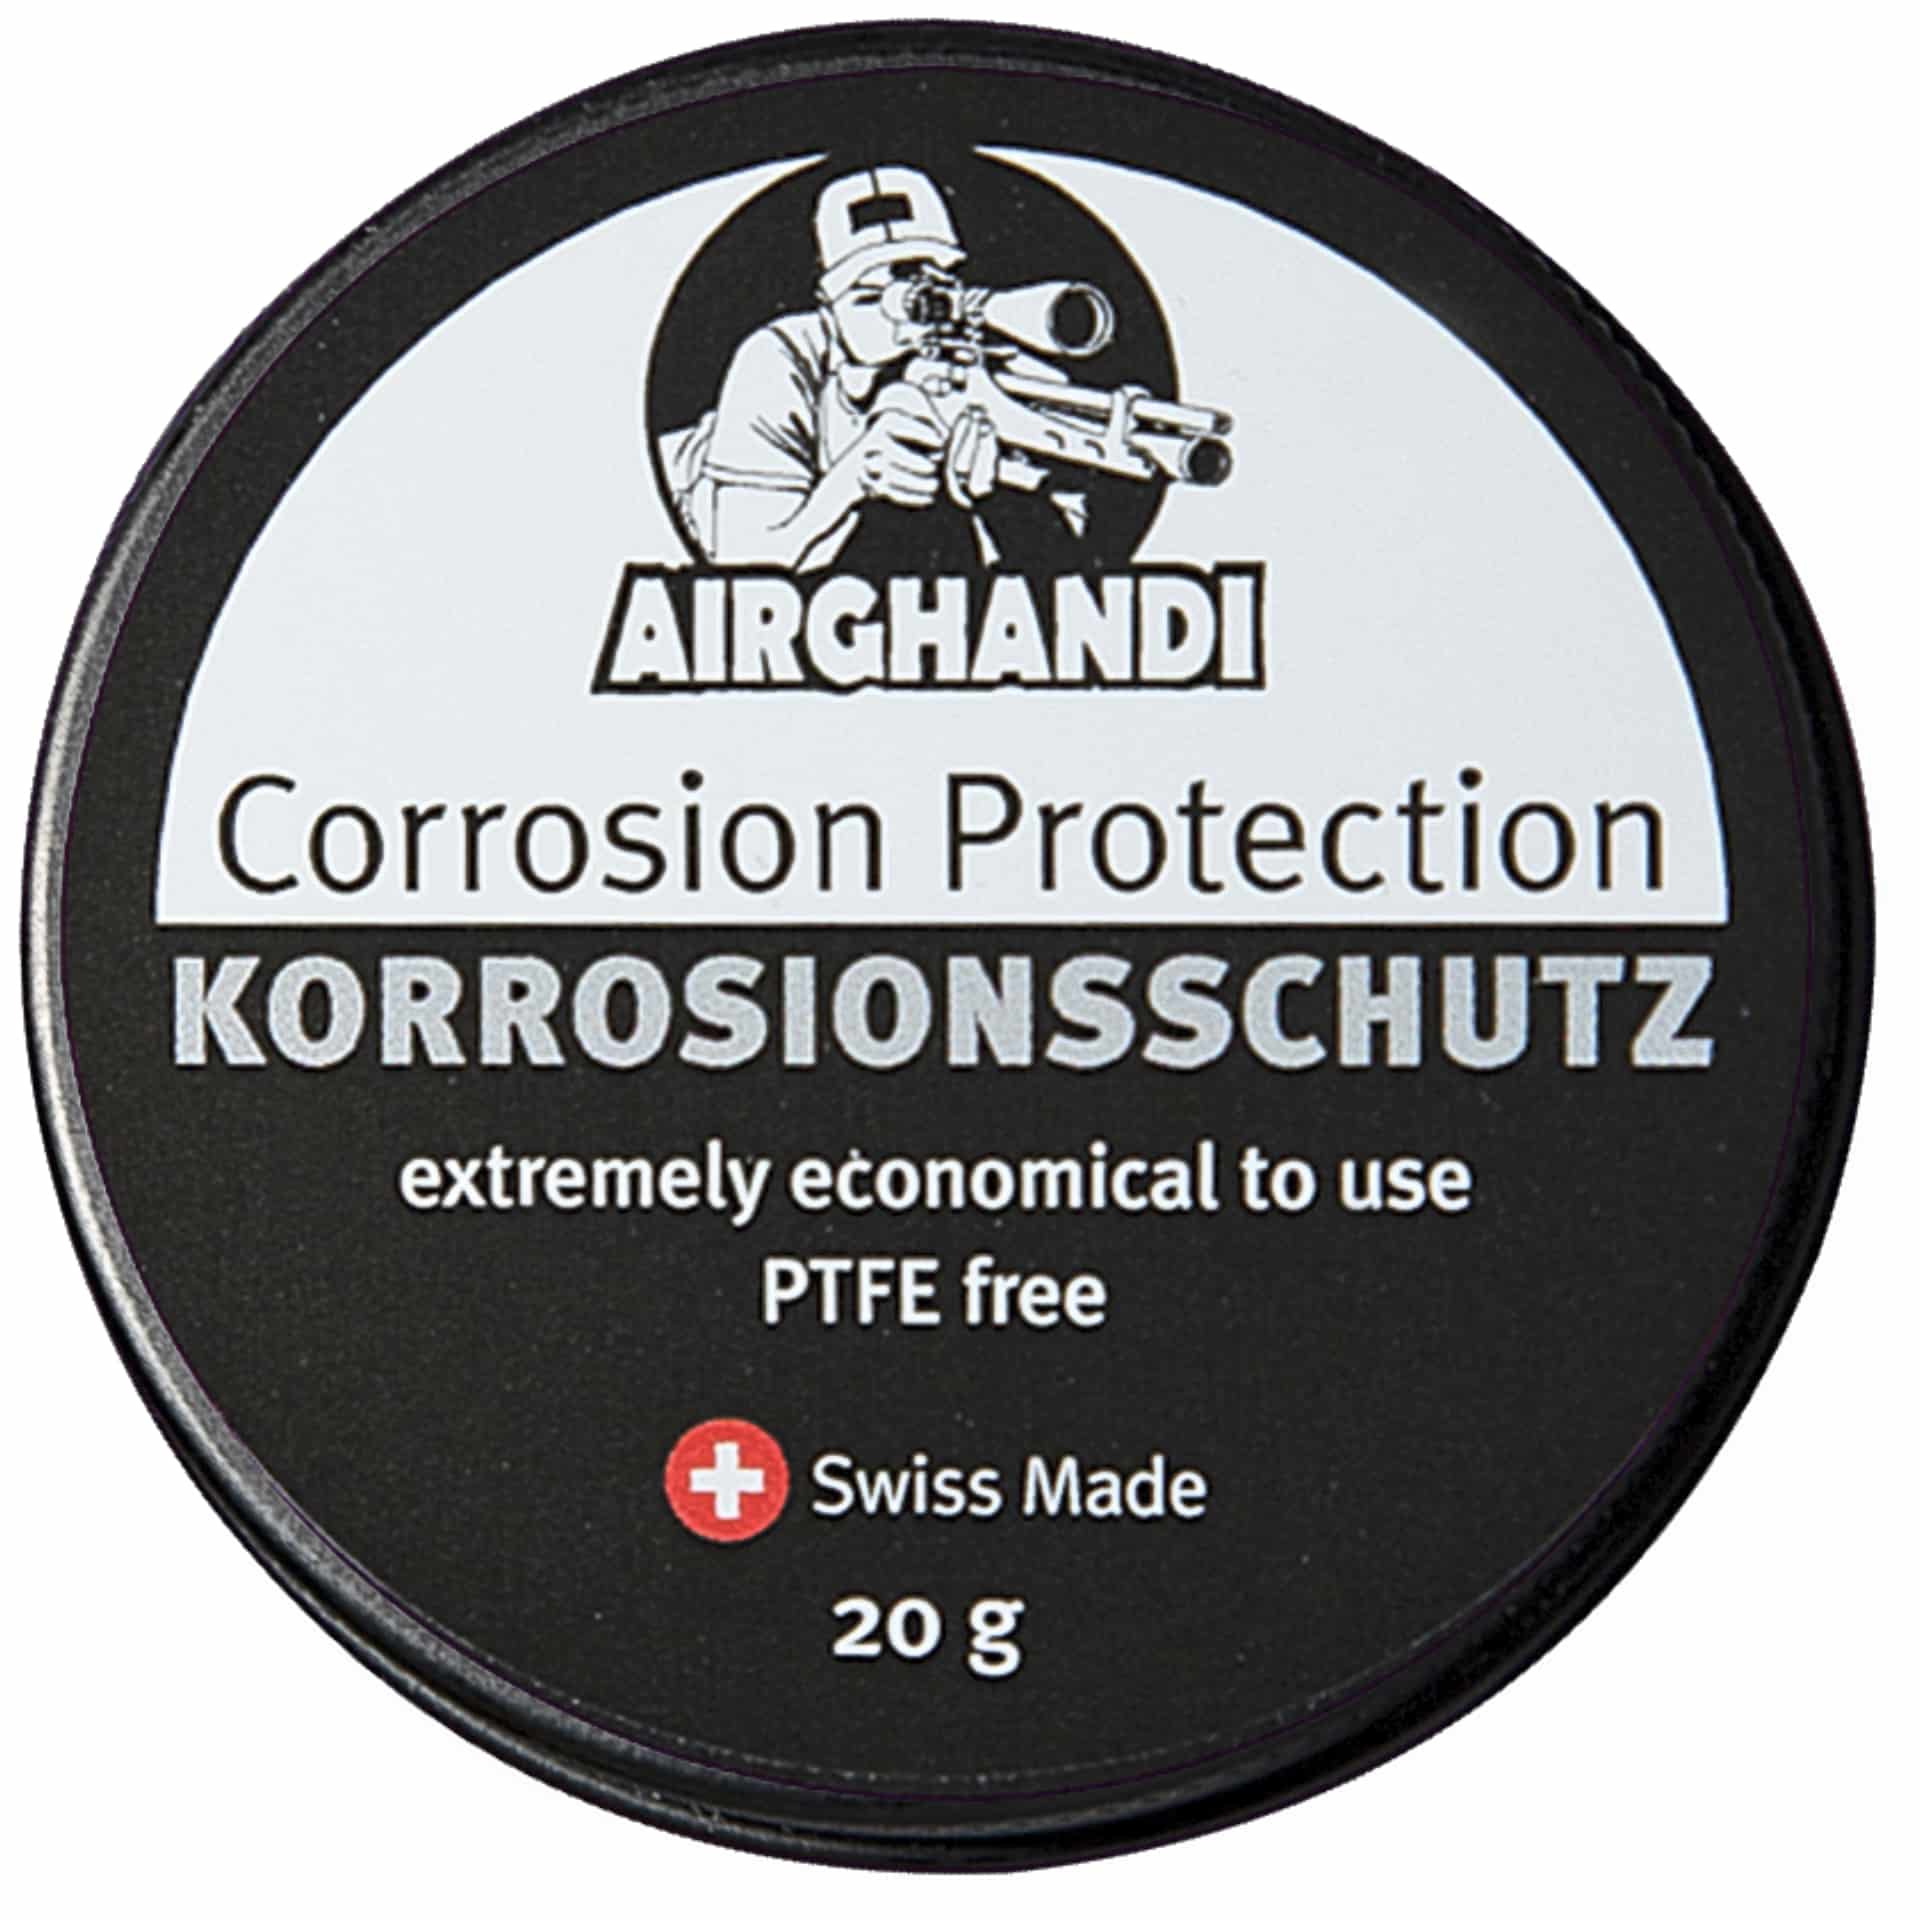 Airghandi's Corrosion Protection